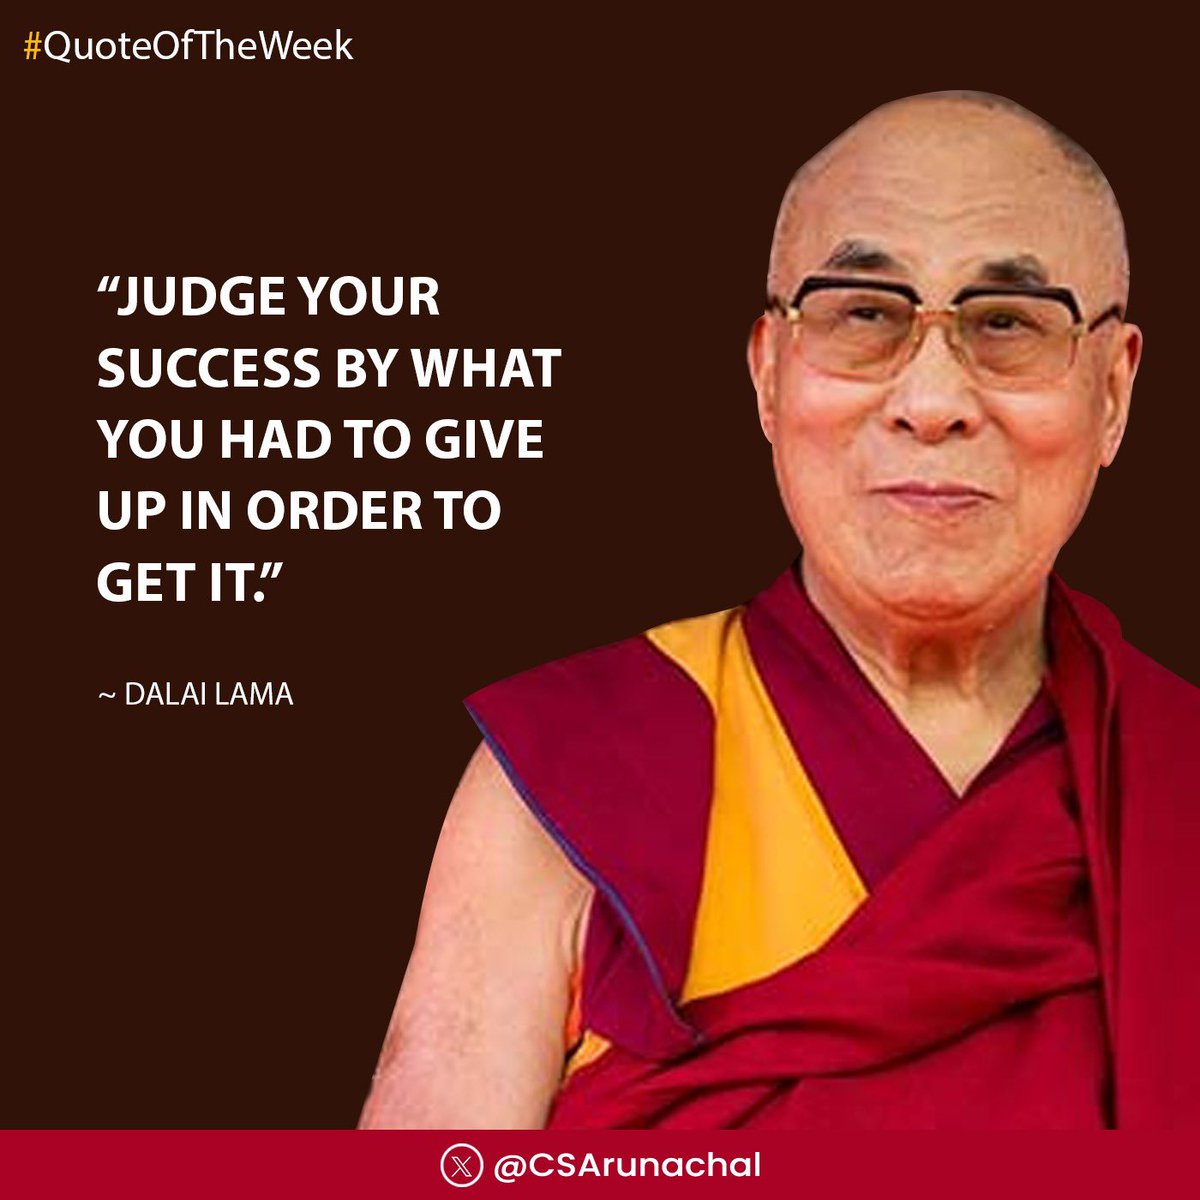 #QuoteOfTheWeek

“Judge your success by what you had to give up in order to get it.”

~ Dalai Lama